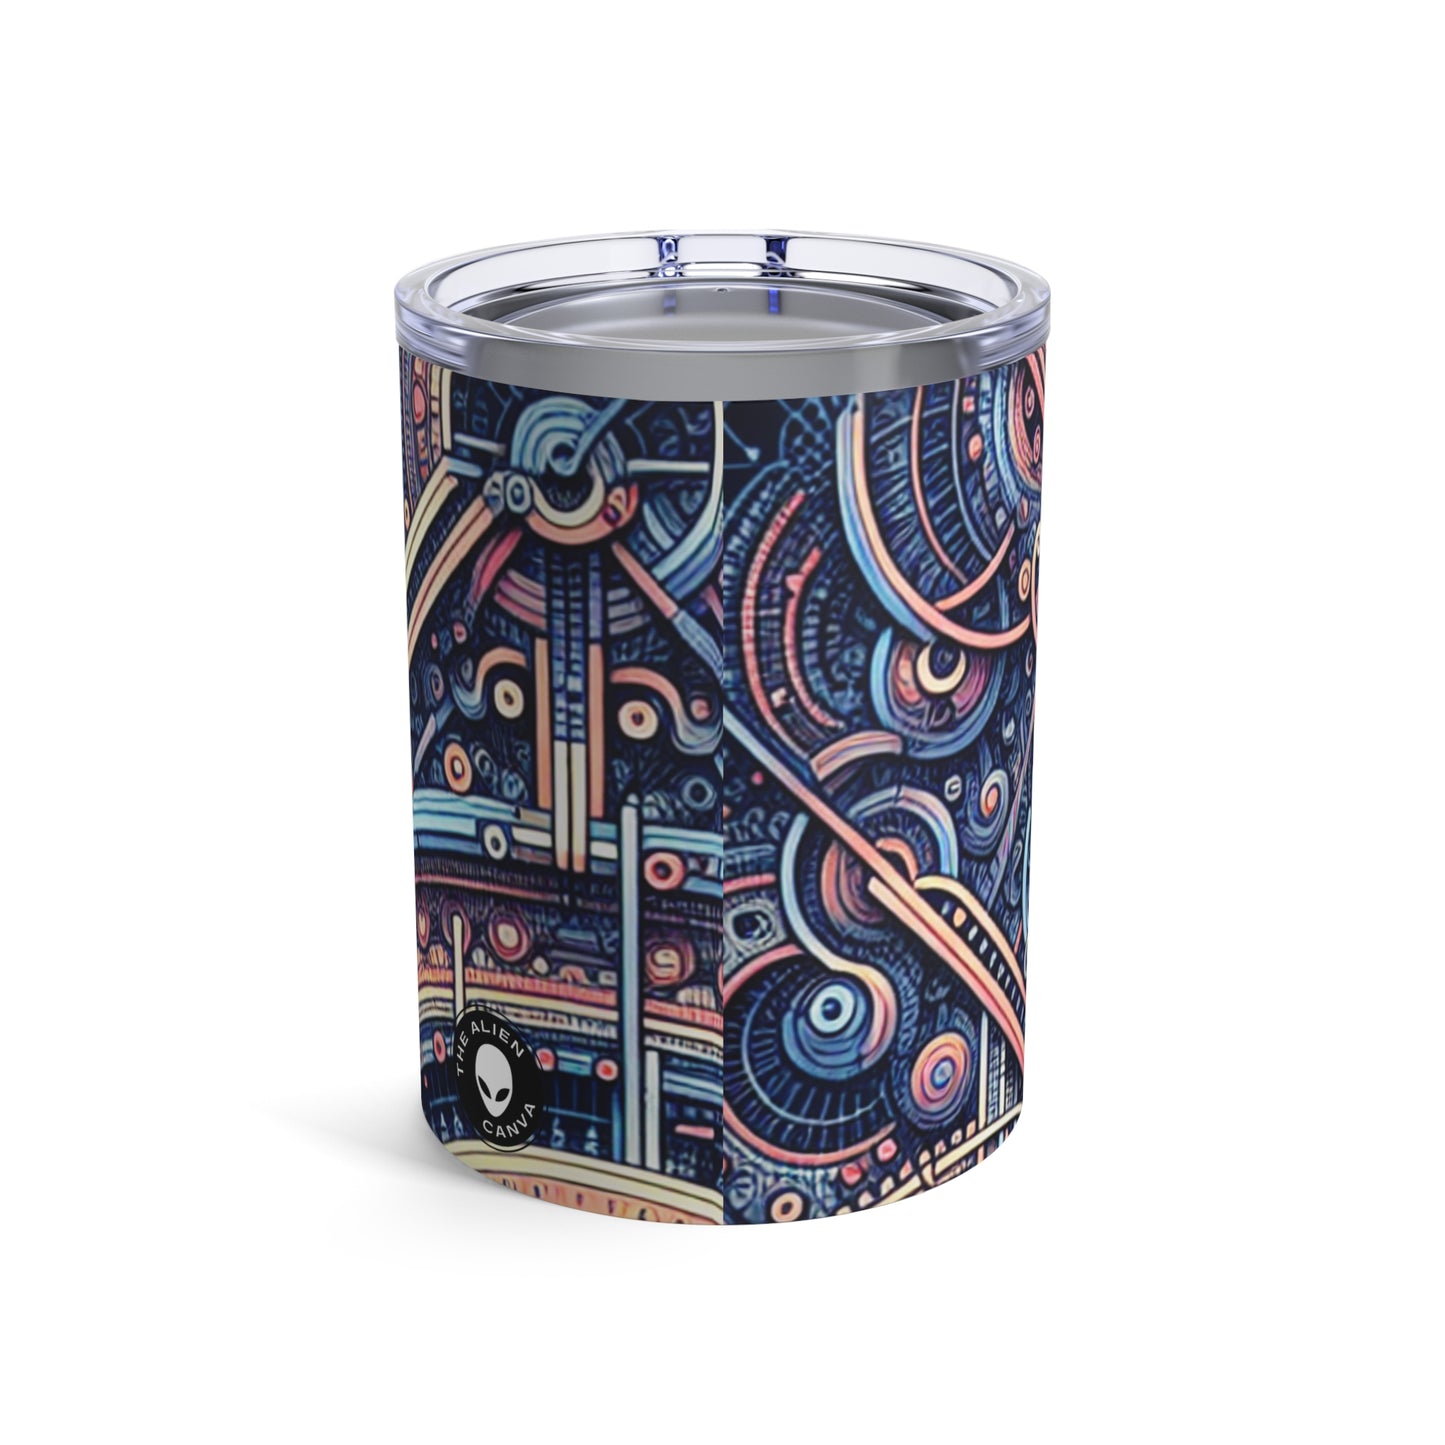 "Chaos & Order: A Dynamic Dance of Colors and Patterns" - The Alien Tumbler 10oz Algorithmic Art